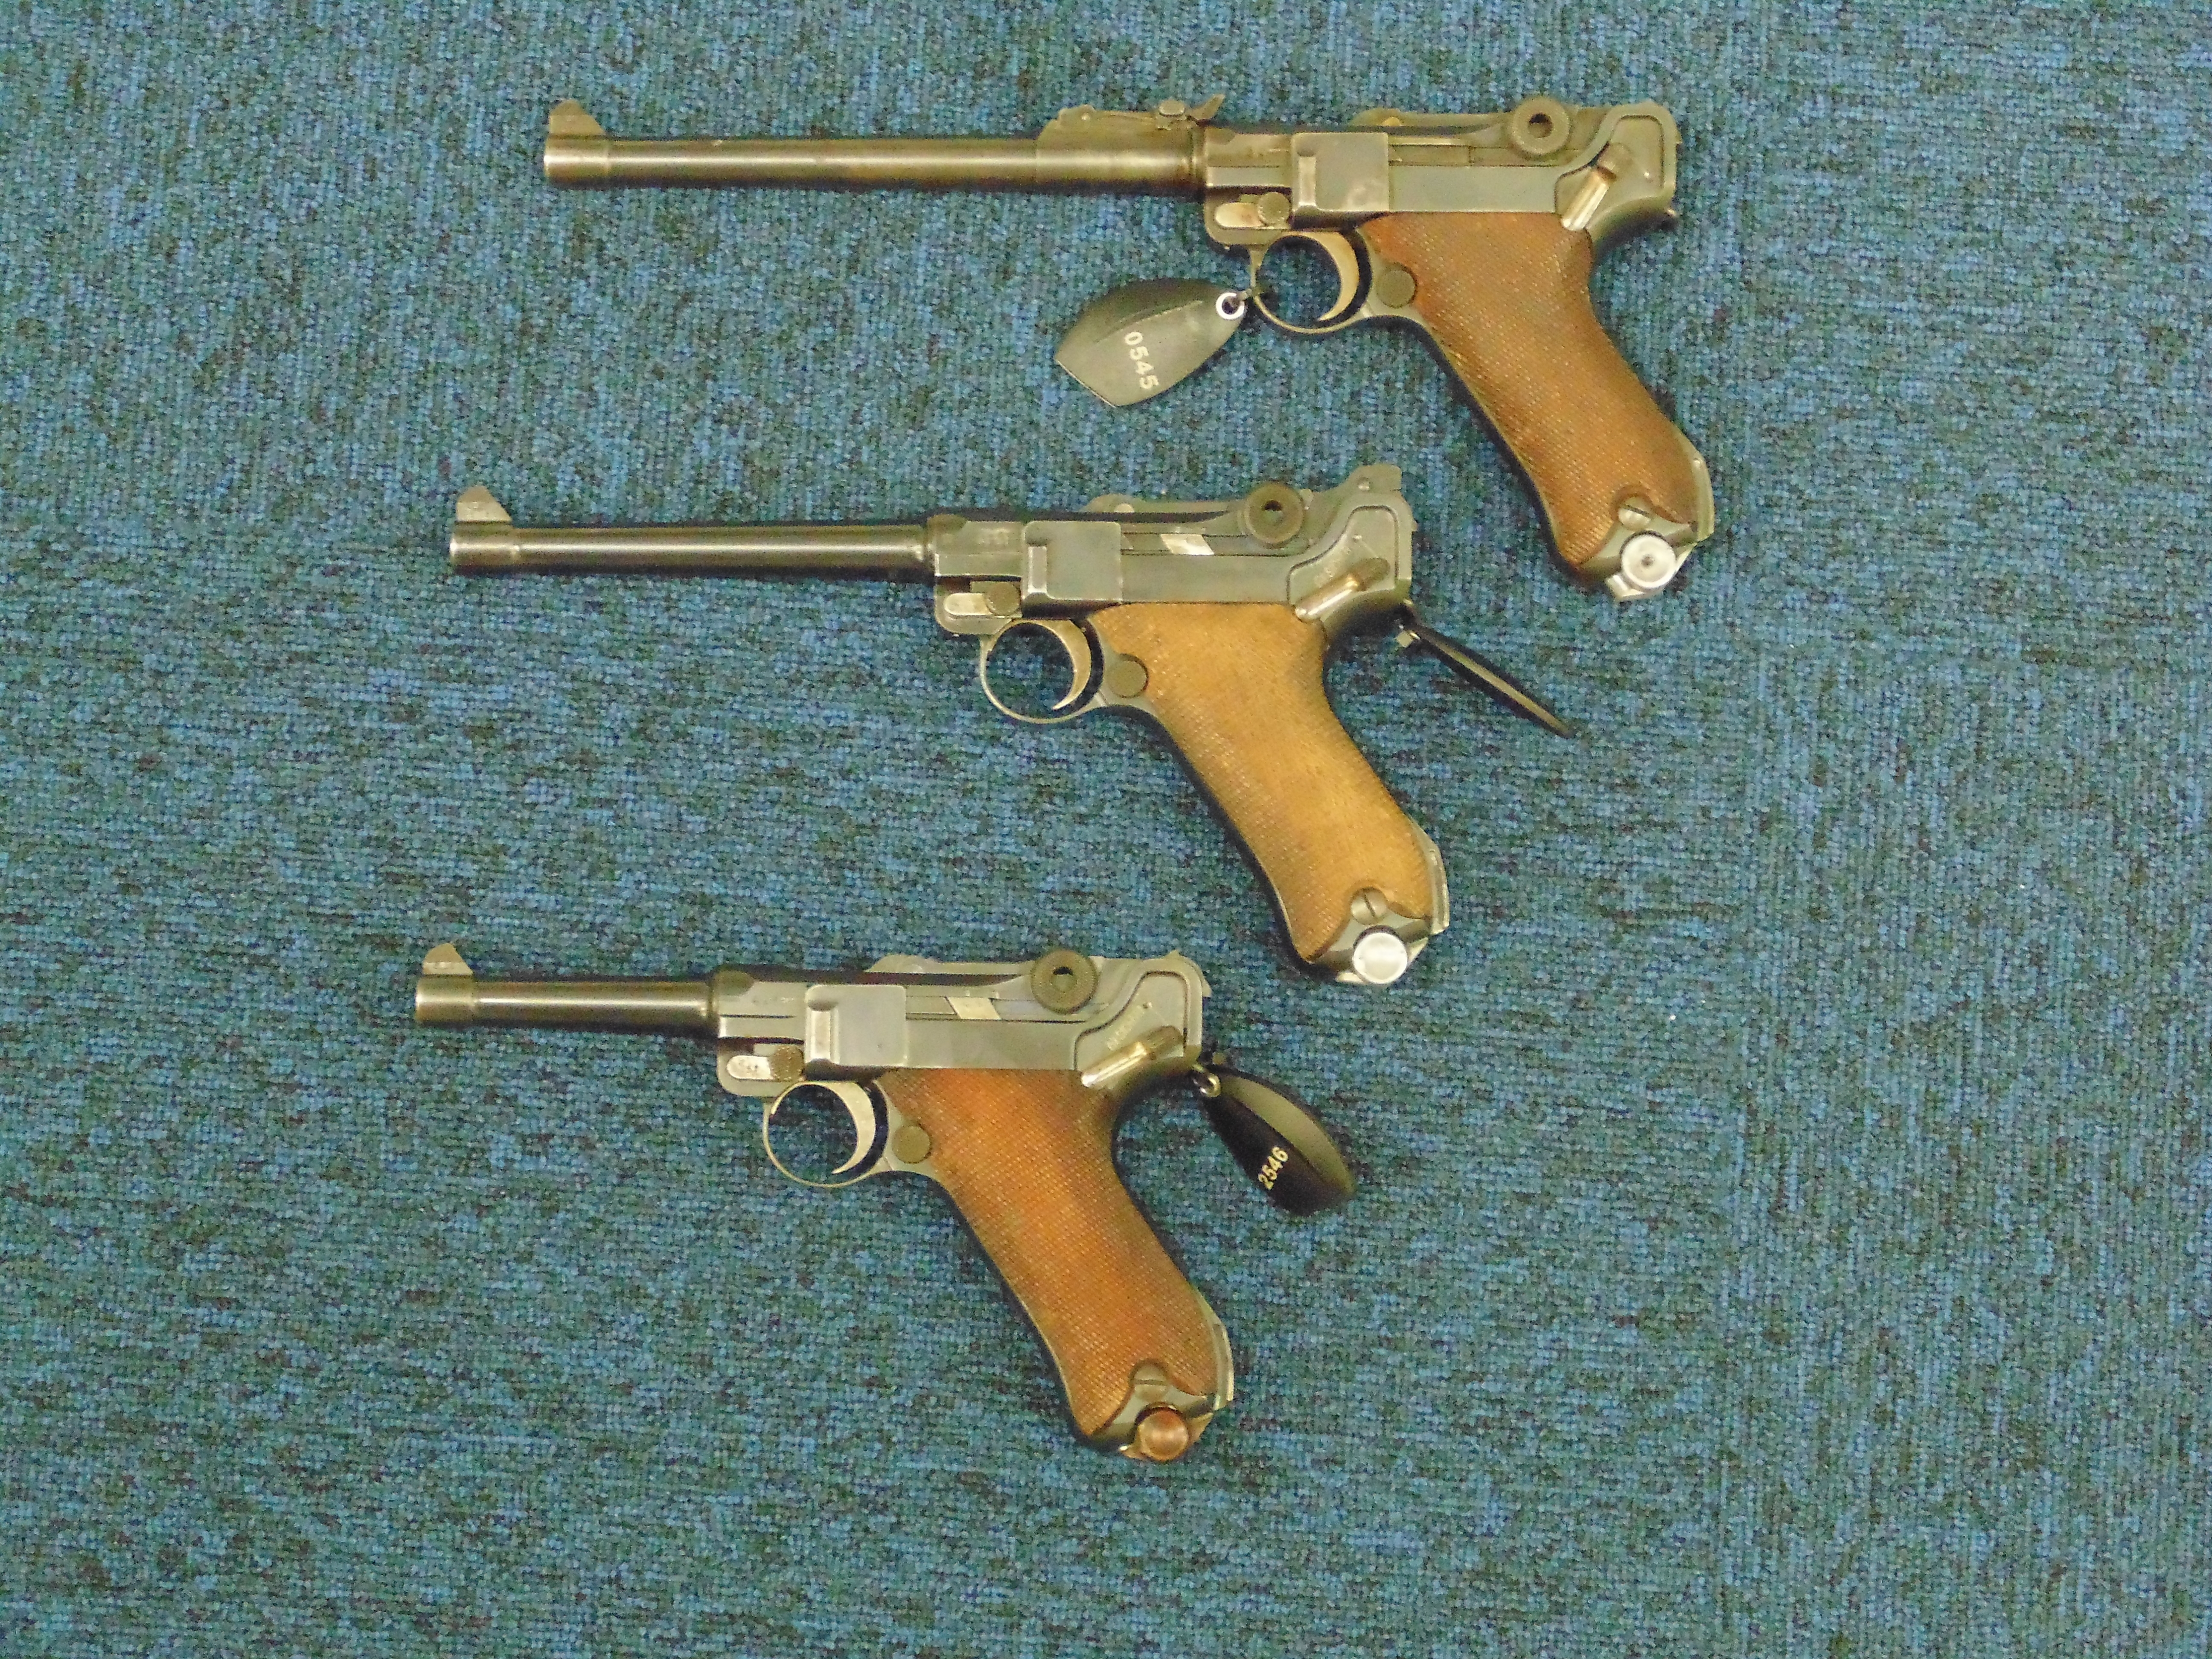 - German service Lugers - the 100mm P08, the 150mm Naval P04 and the 200mm Lange Pistol 08.